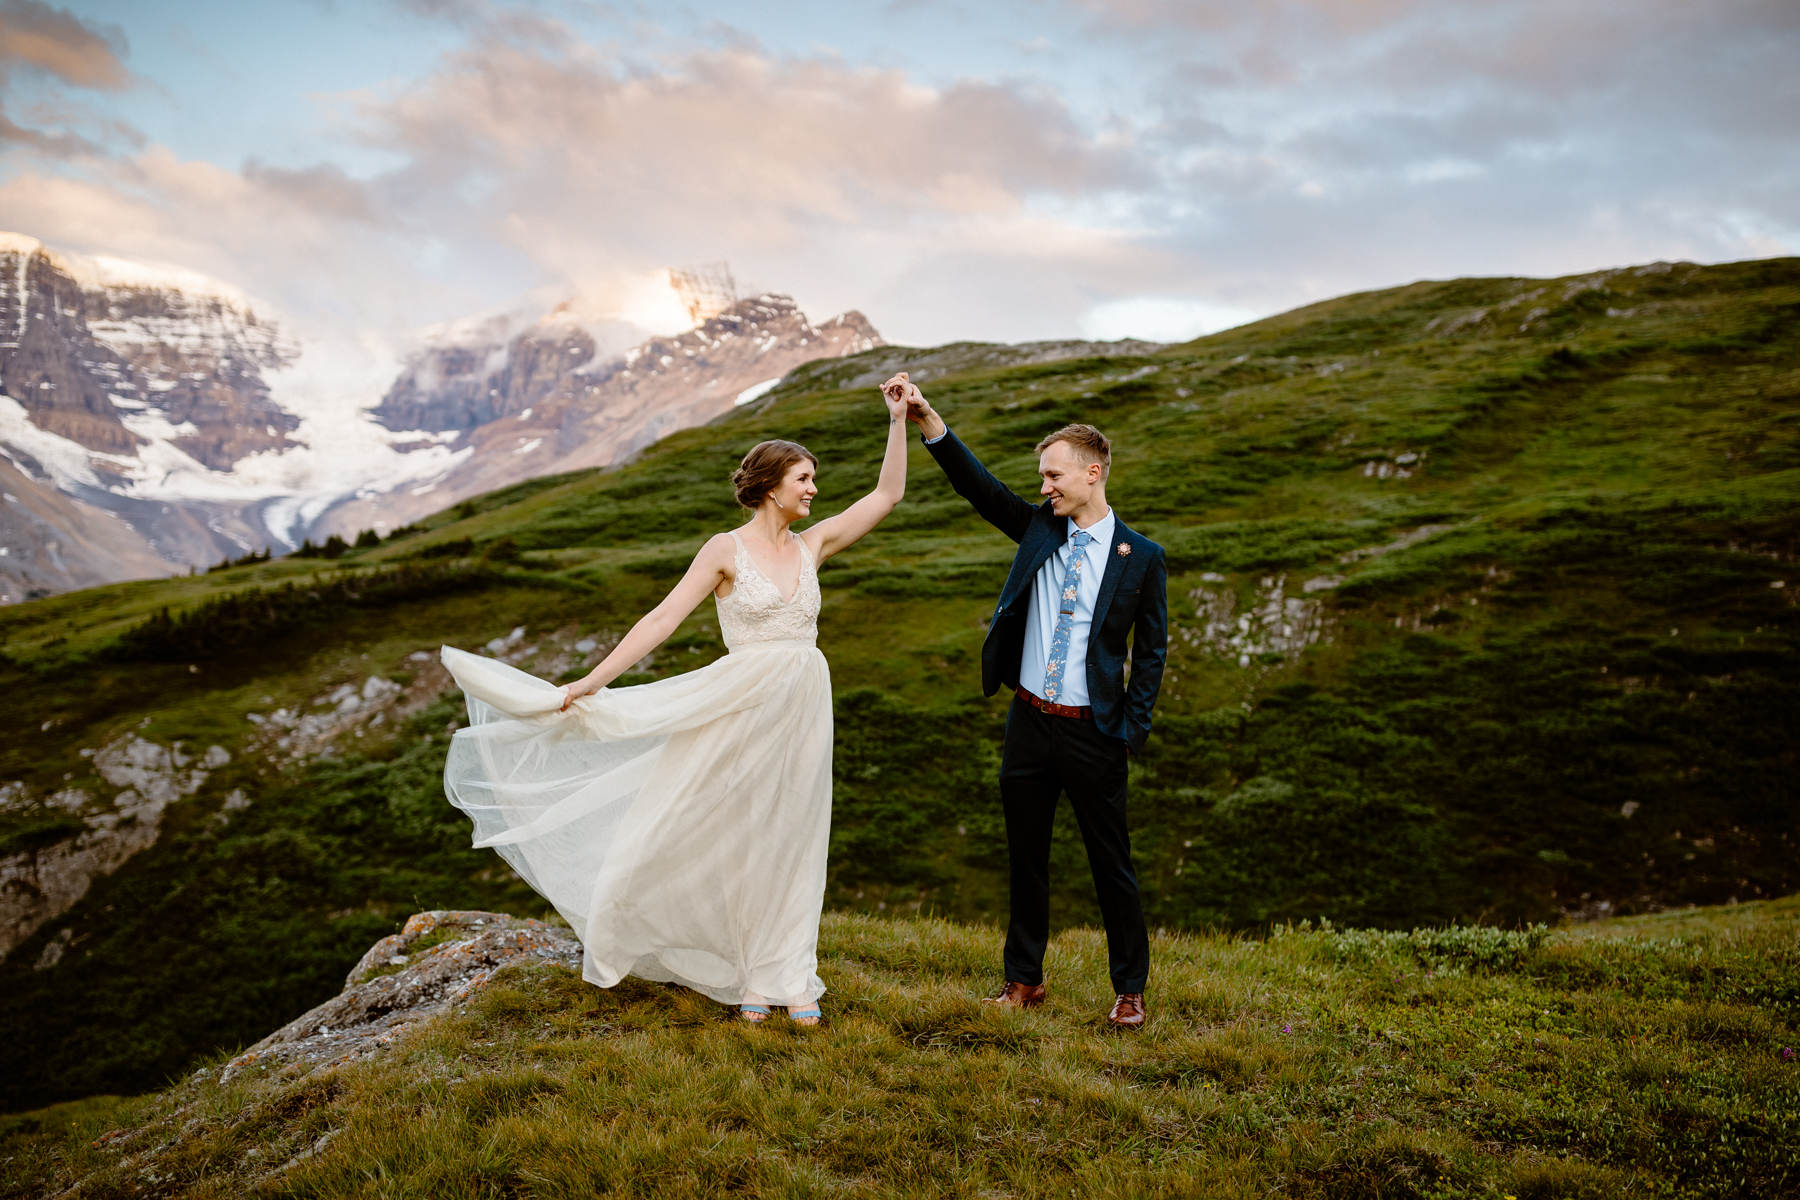 Hiking Elopement Photographers in Banff National Park - Photo 22